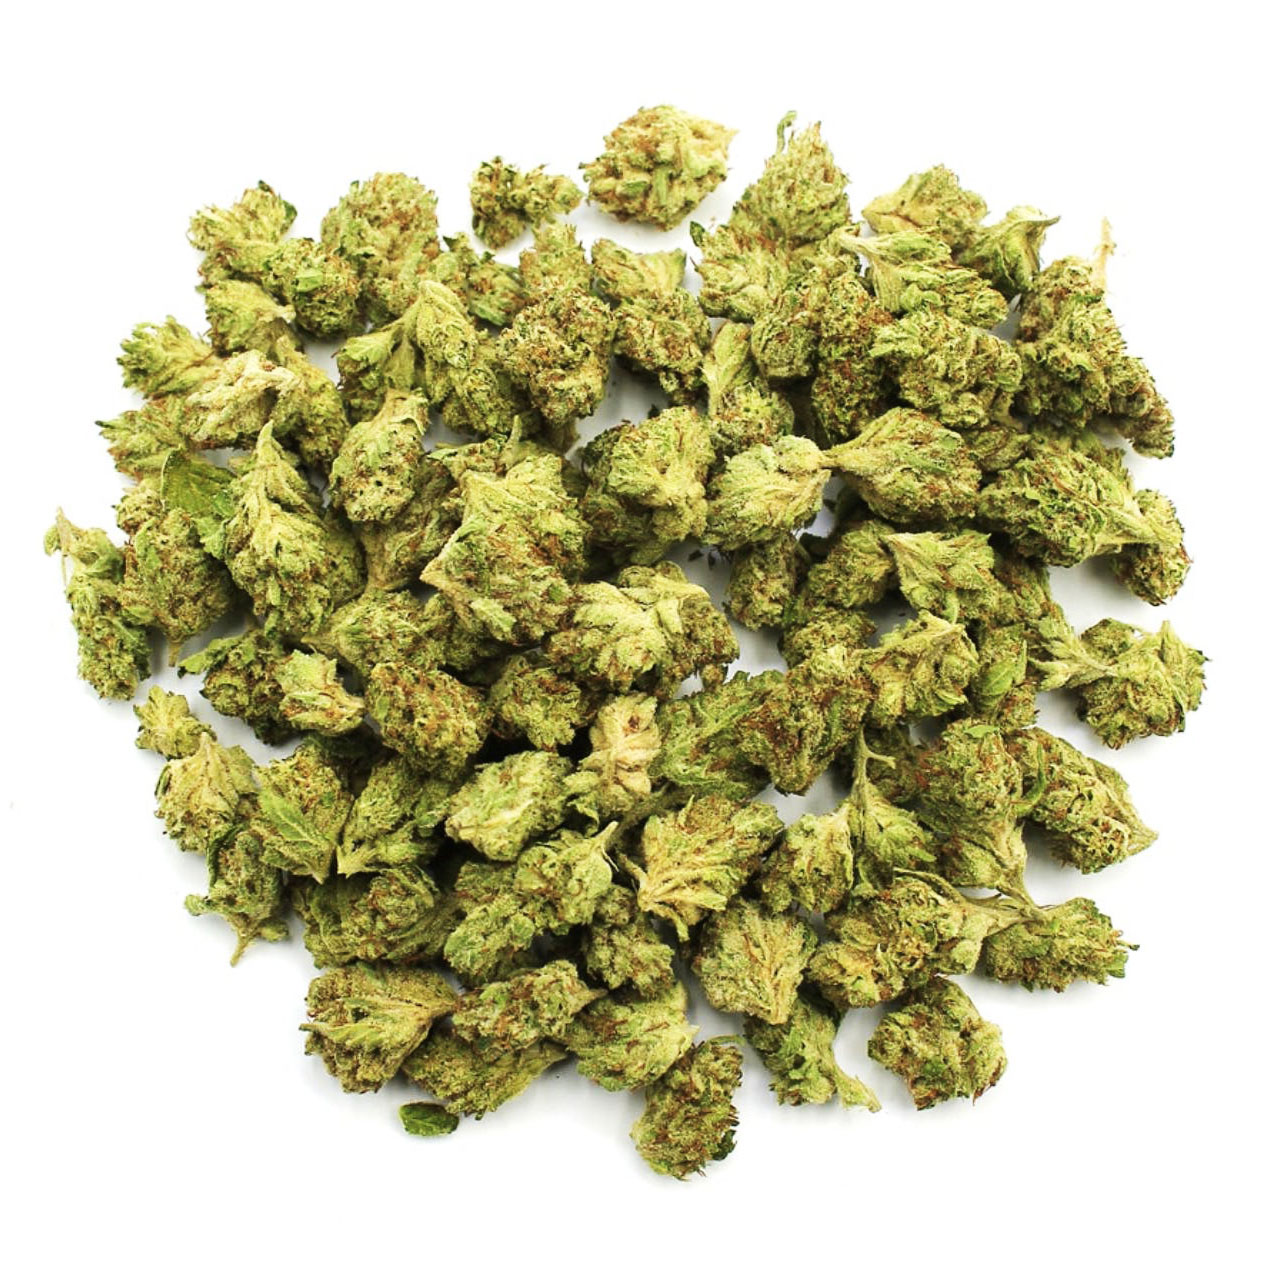 A small pile of small marijuana nuggets often referred to as smalls from hotgrass.ca